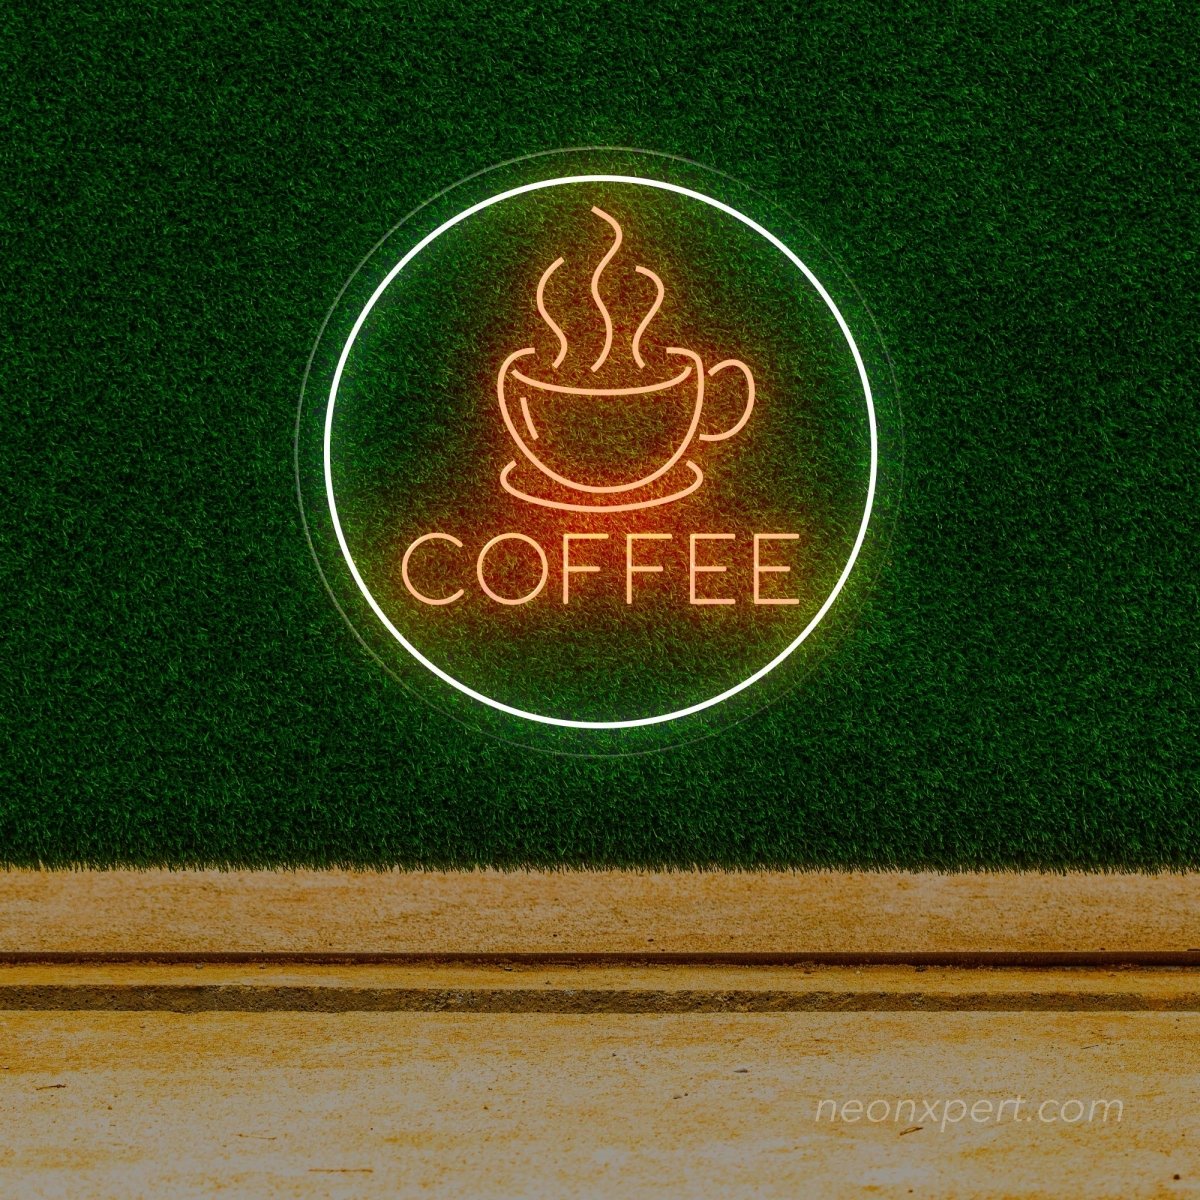 Coffee Neon Sign | Outdoor Led Light For Coffee Shop - NeonXpert